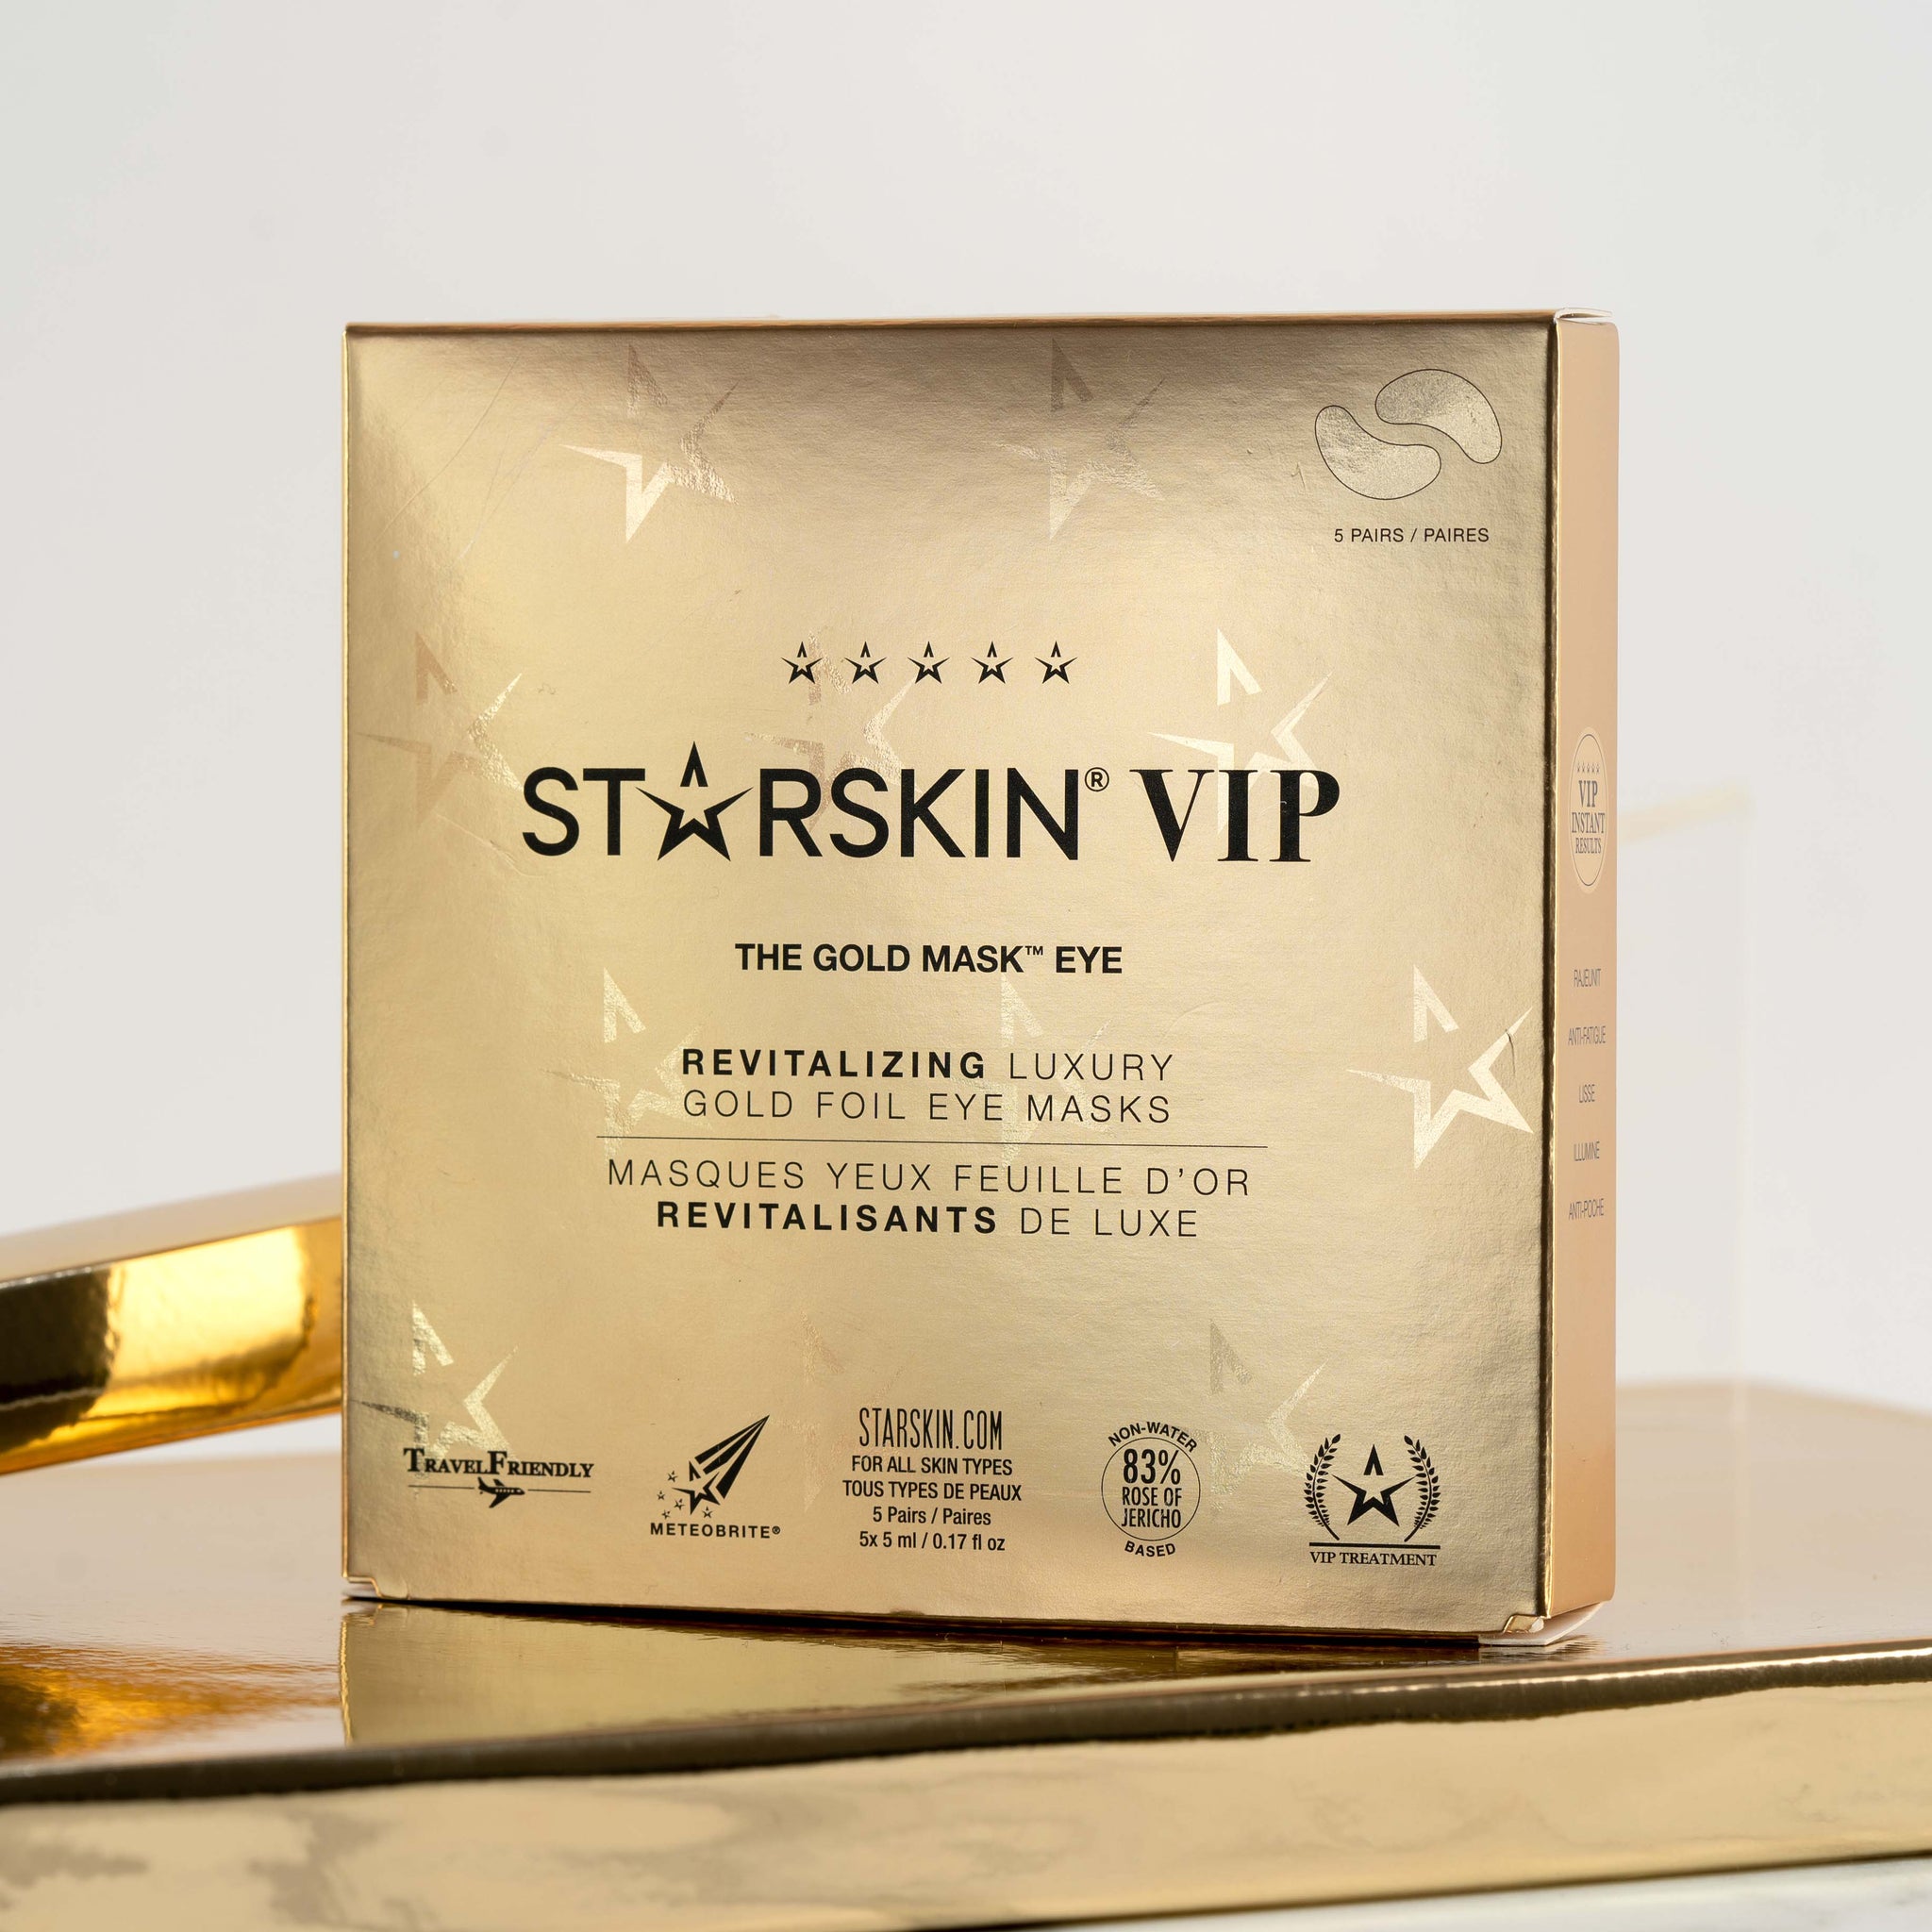 Starskin Gold Mask - eye product packaging in the middle of the image. The product is being displayed in a gold box